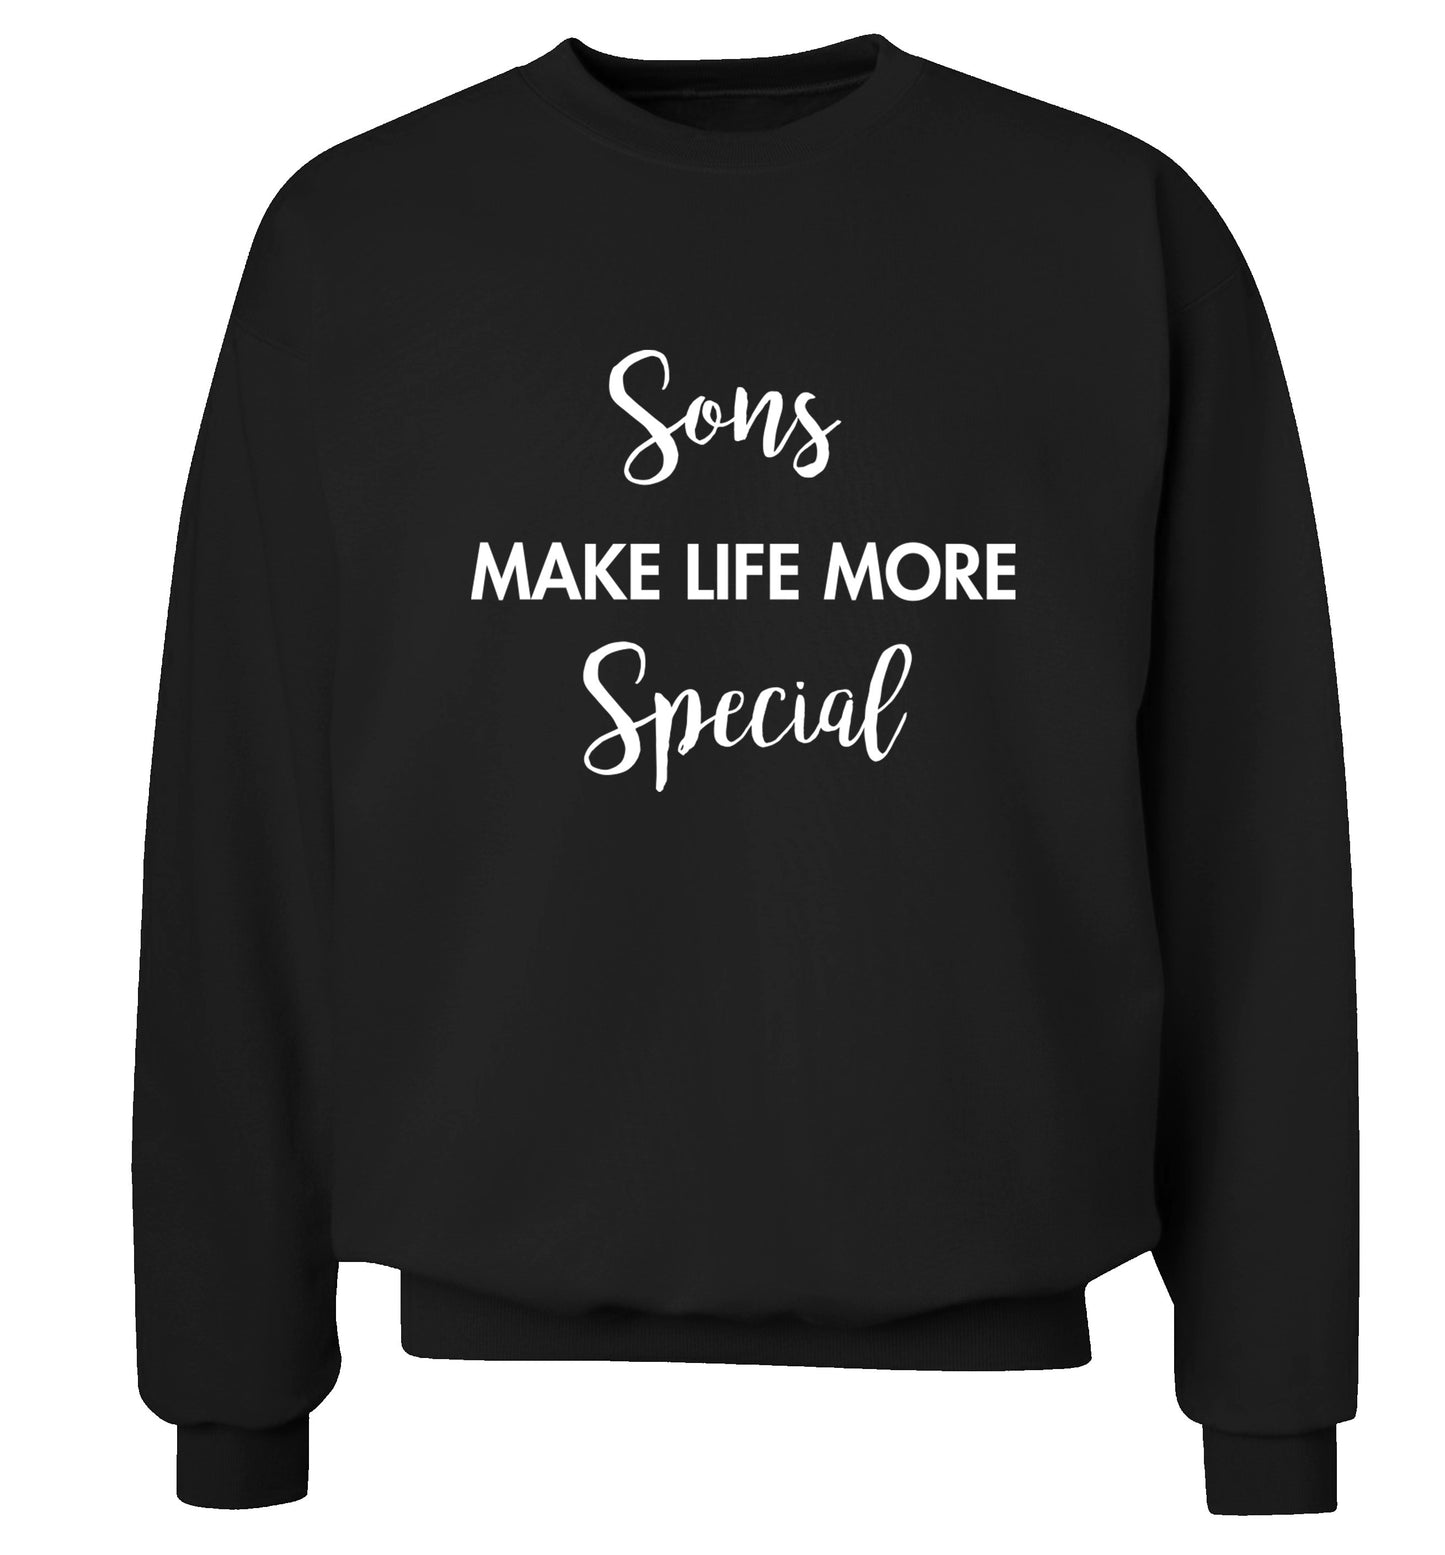 Sons make life more special Adult's unisex black Sweater 2XL